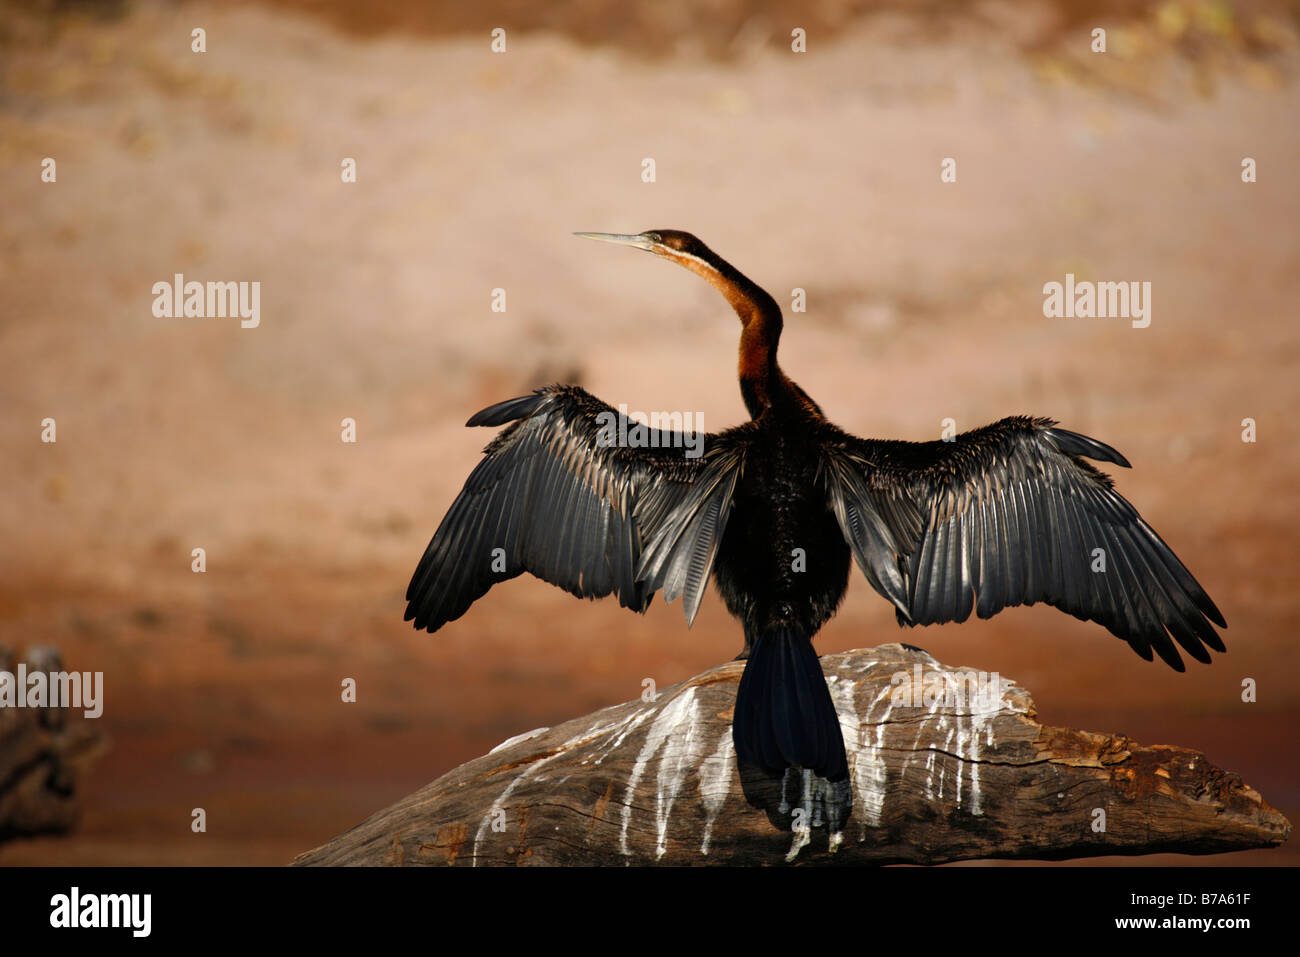 A darter with outspread wings perched on a log Stock Photo